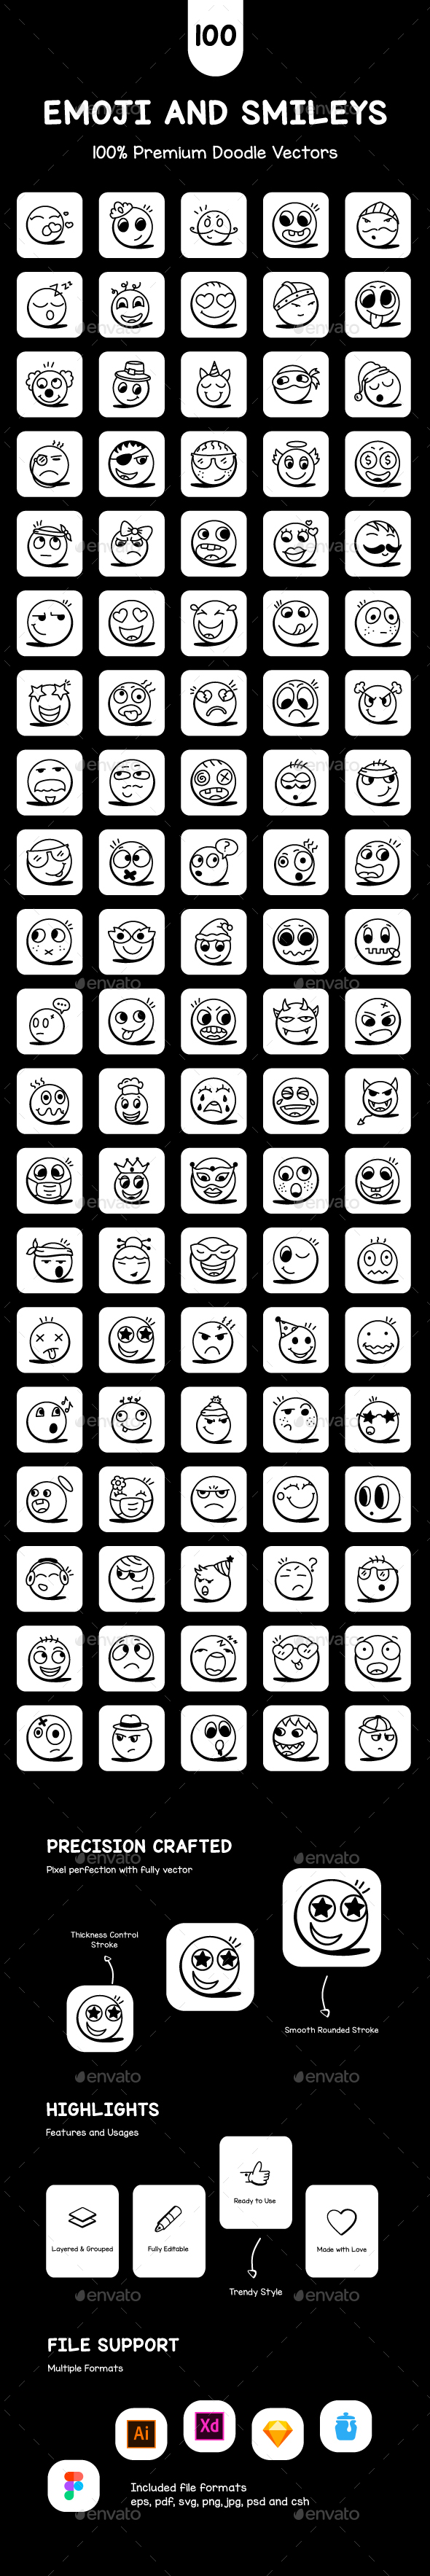 Collection of Smileys and Emoji Icons